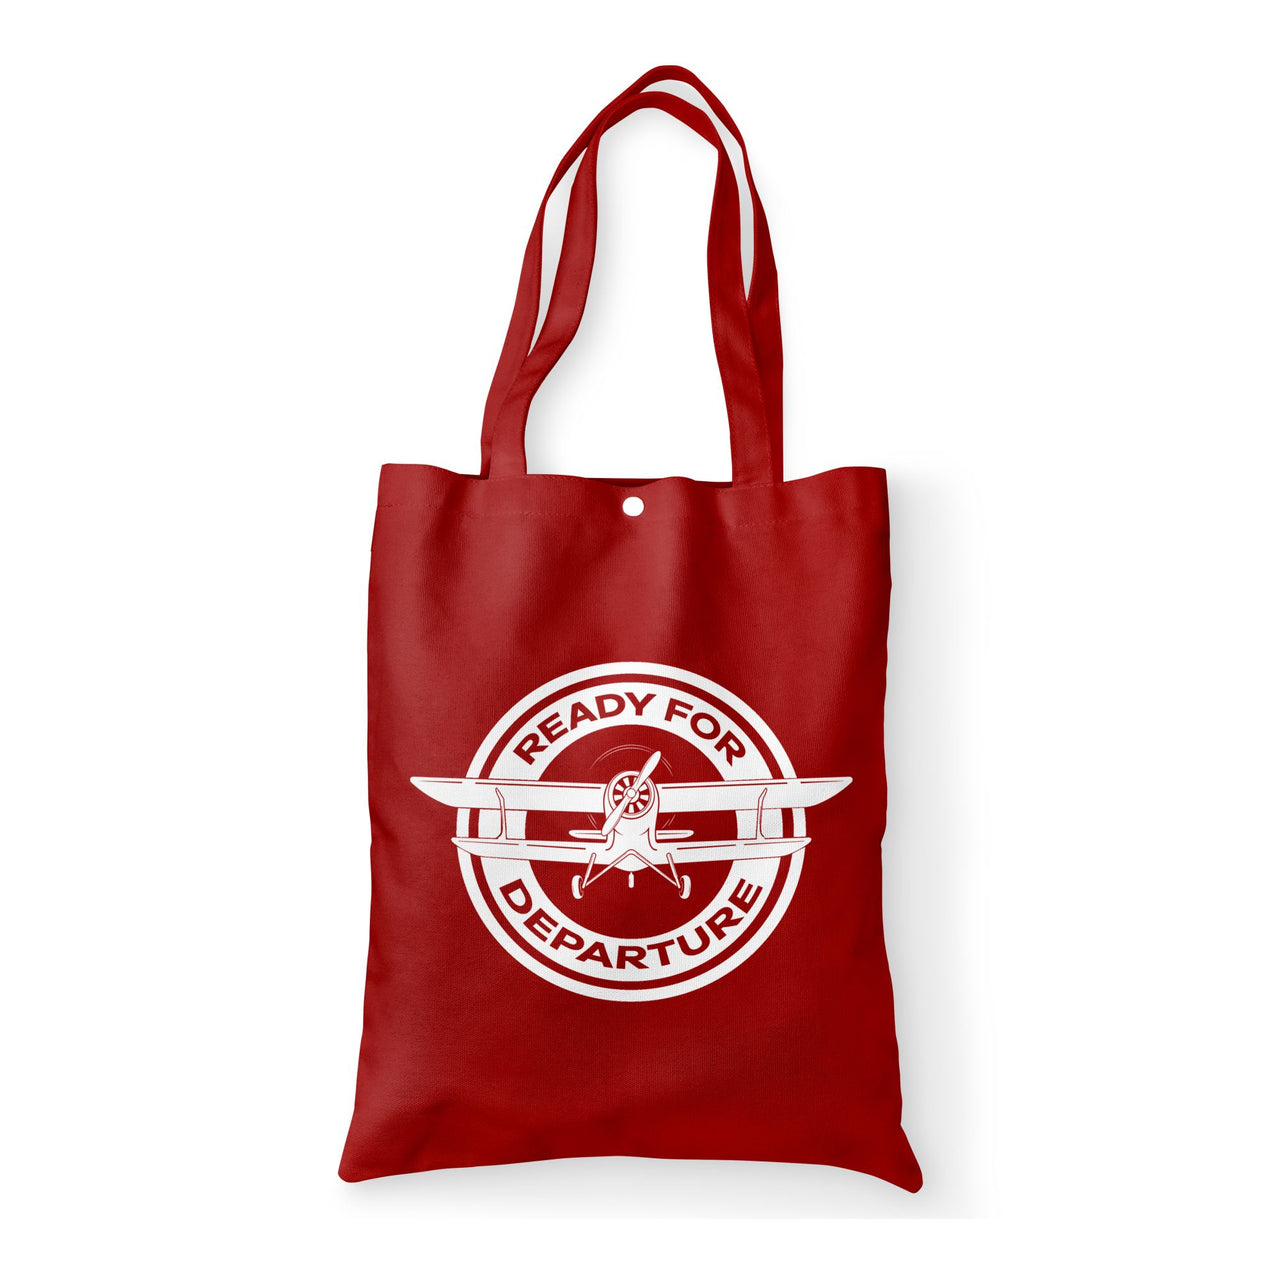 Ready for Departure Designed Tote Bags